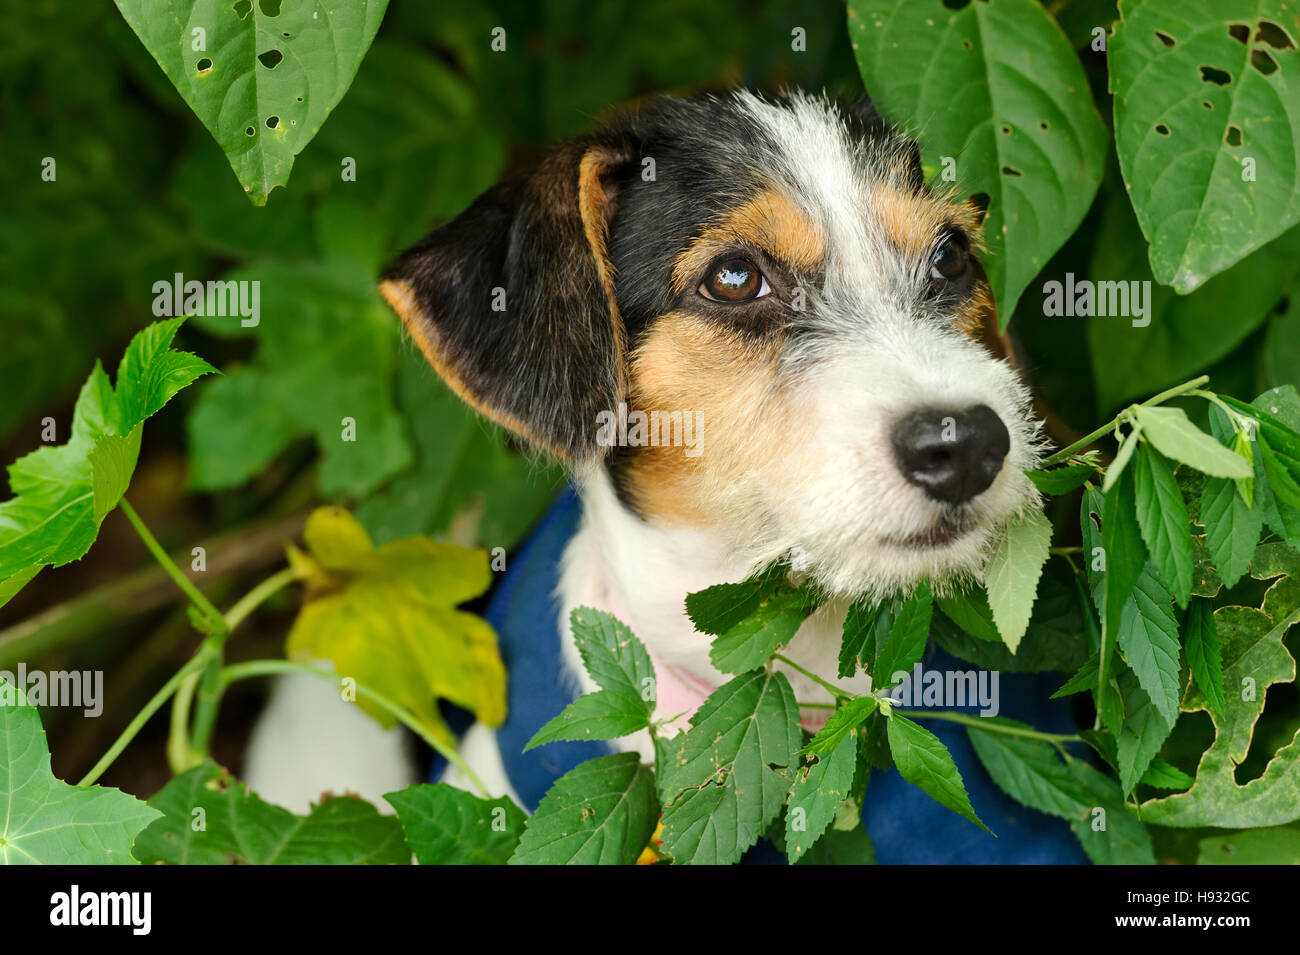 Cute puppy is an adorable puppy dog face outdoors with big brown cute eyes. Stock Photo